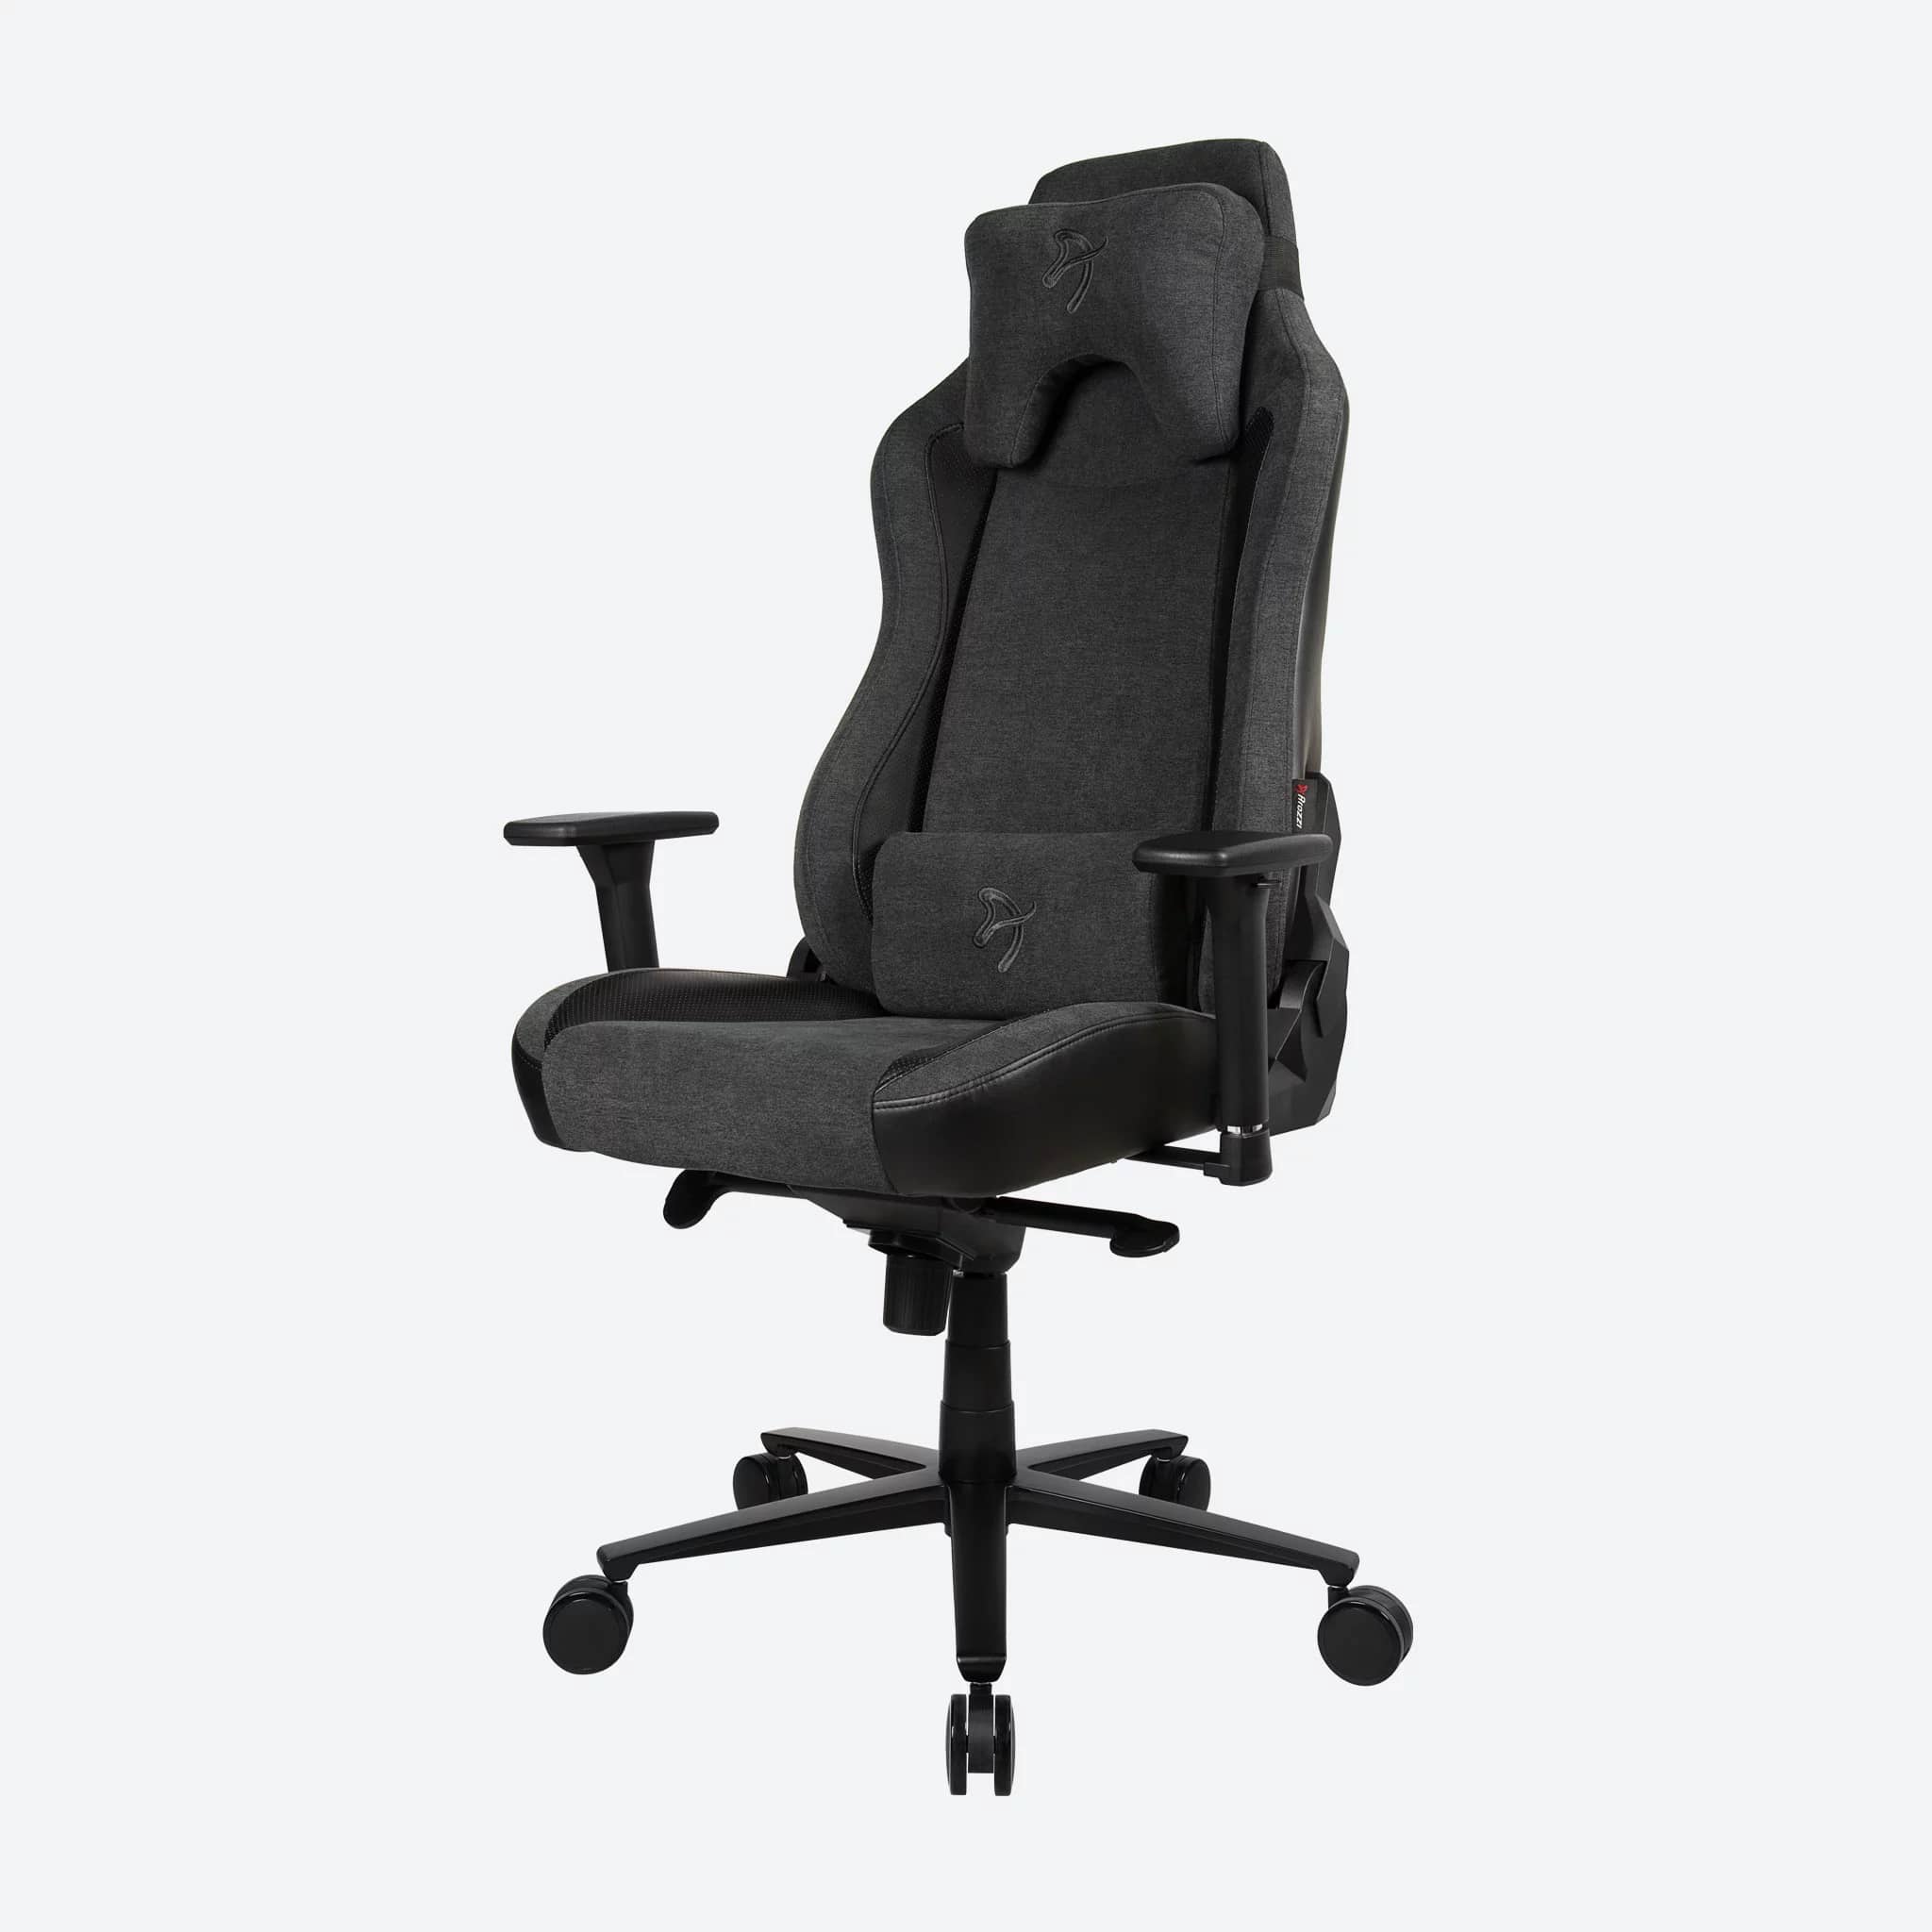 Arozzi PU Leather Gaming Chair with Armrests 3D Fabric Hybrid Furniture Top Level